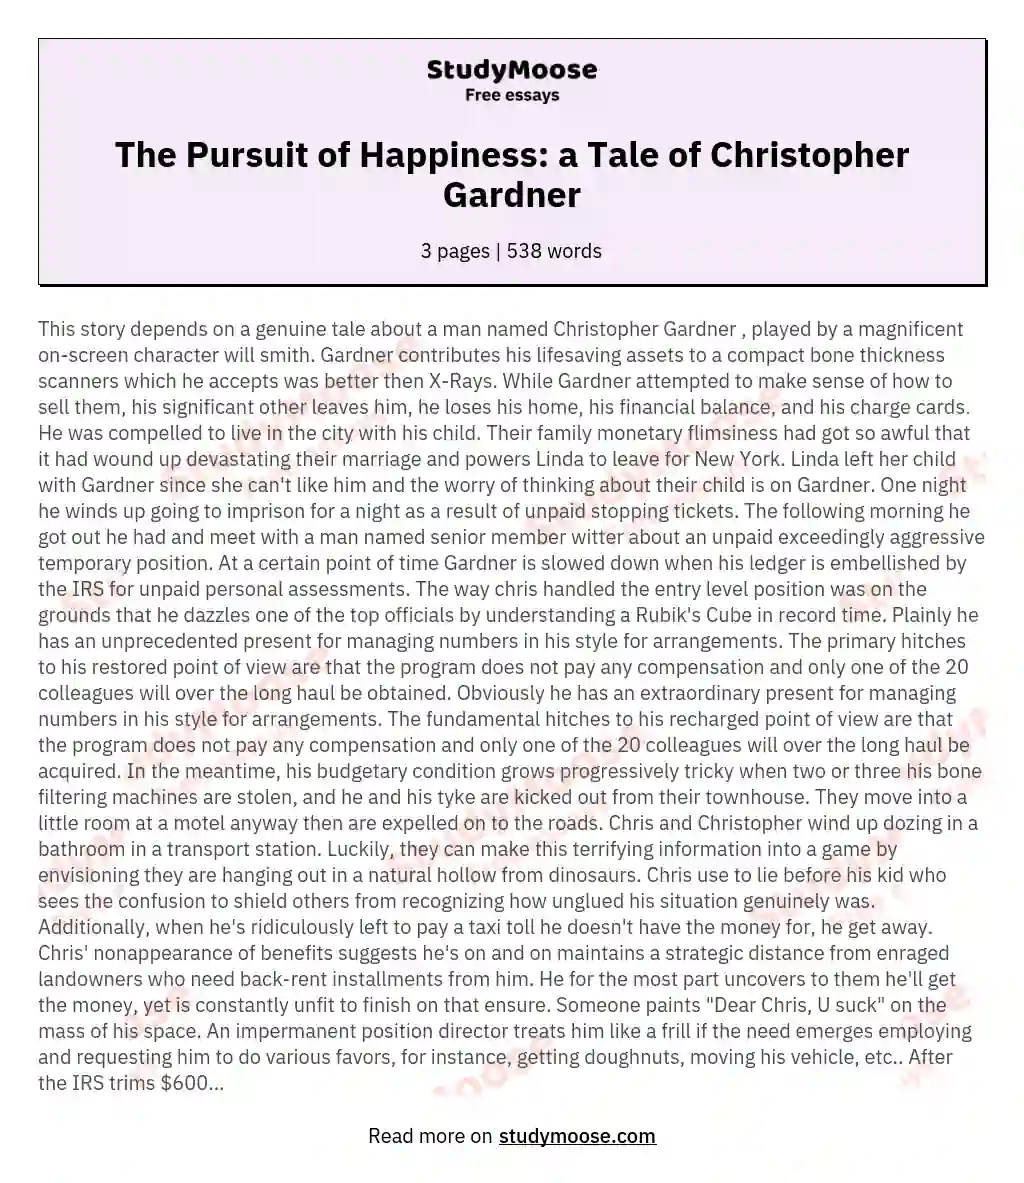 The Pursuit of Happiness: a Tale of Christopher Gardner